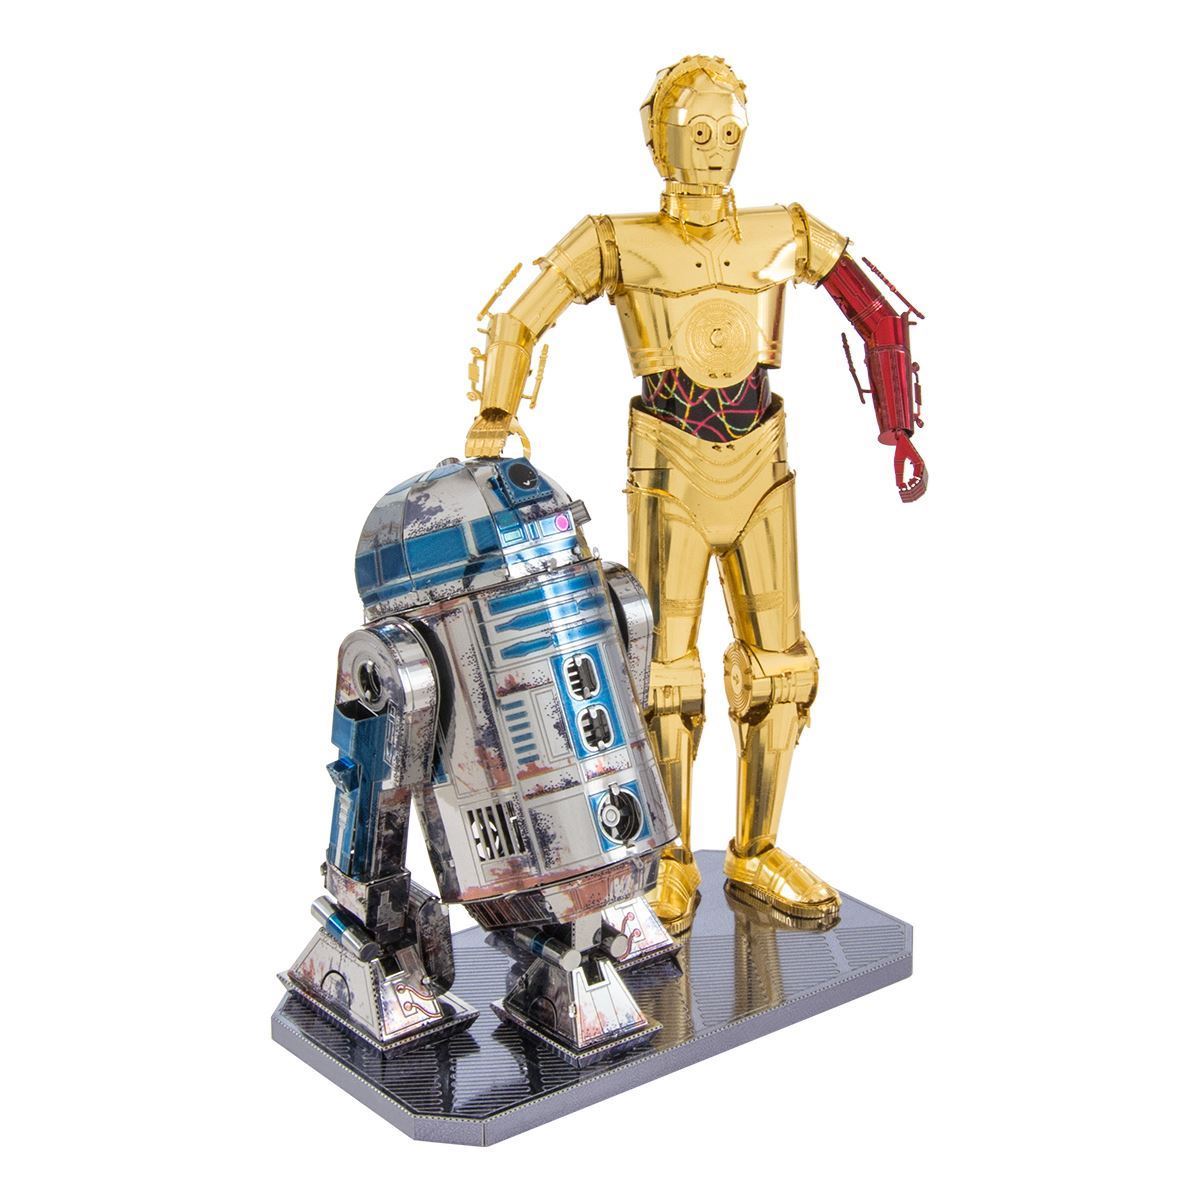 C-3PO & R2-D2 - Steel 3D Model Kit - Metal Earth gift puzzle puzzle